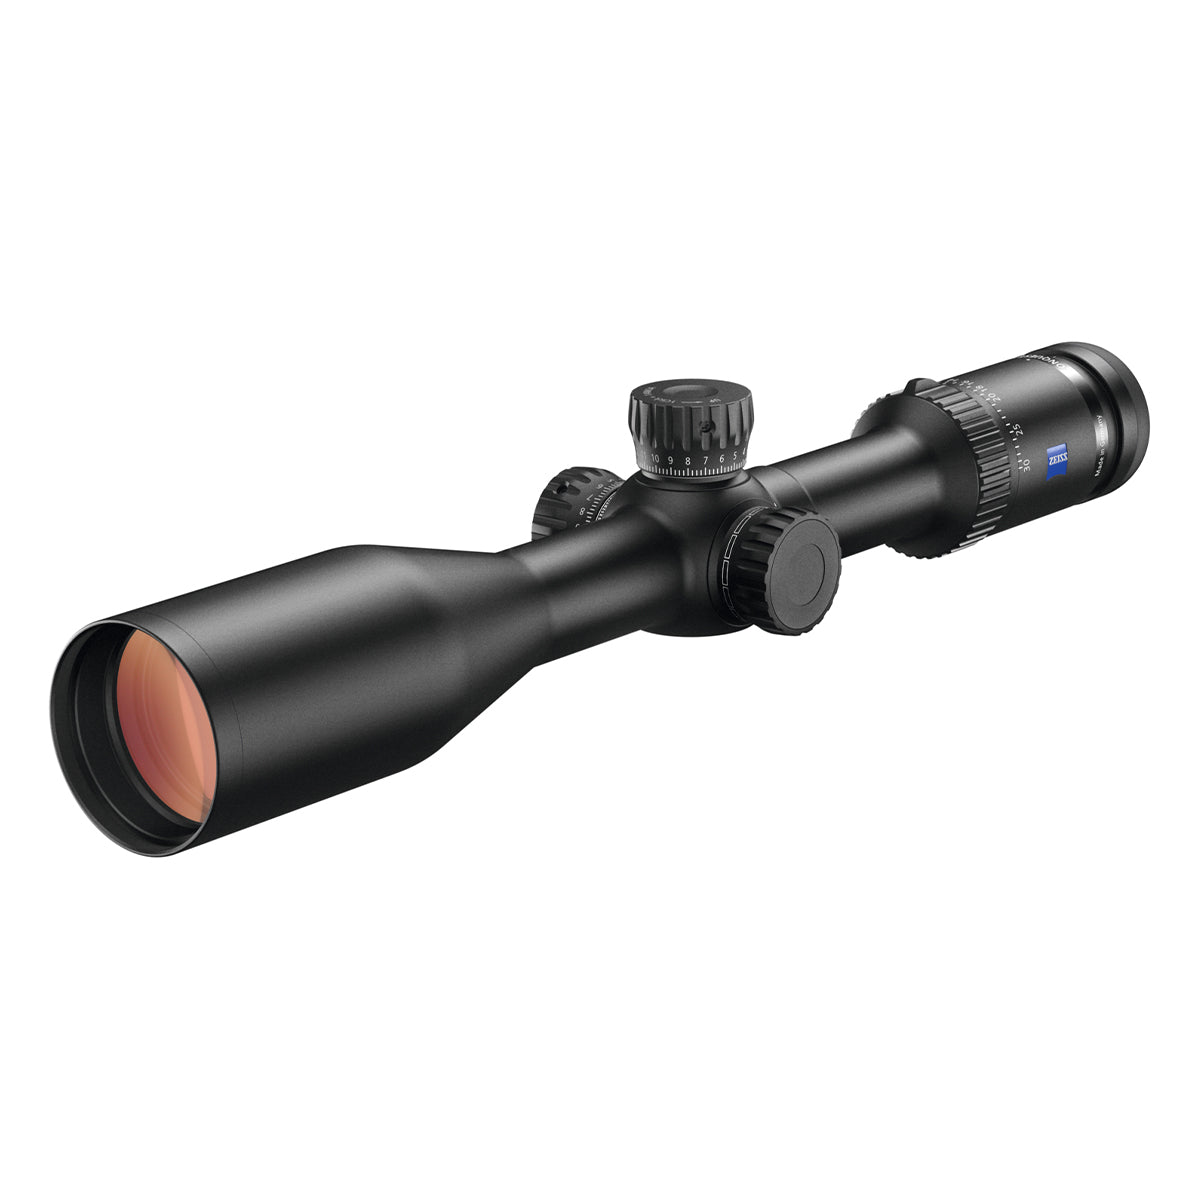 Zeiss Conquest V6 5-30x50 Riflescope w/ ZMOA-1 Reticle by Zeiss | Optics - goHUNT Shop